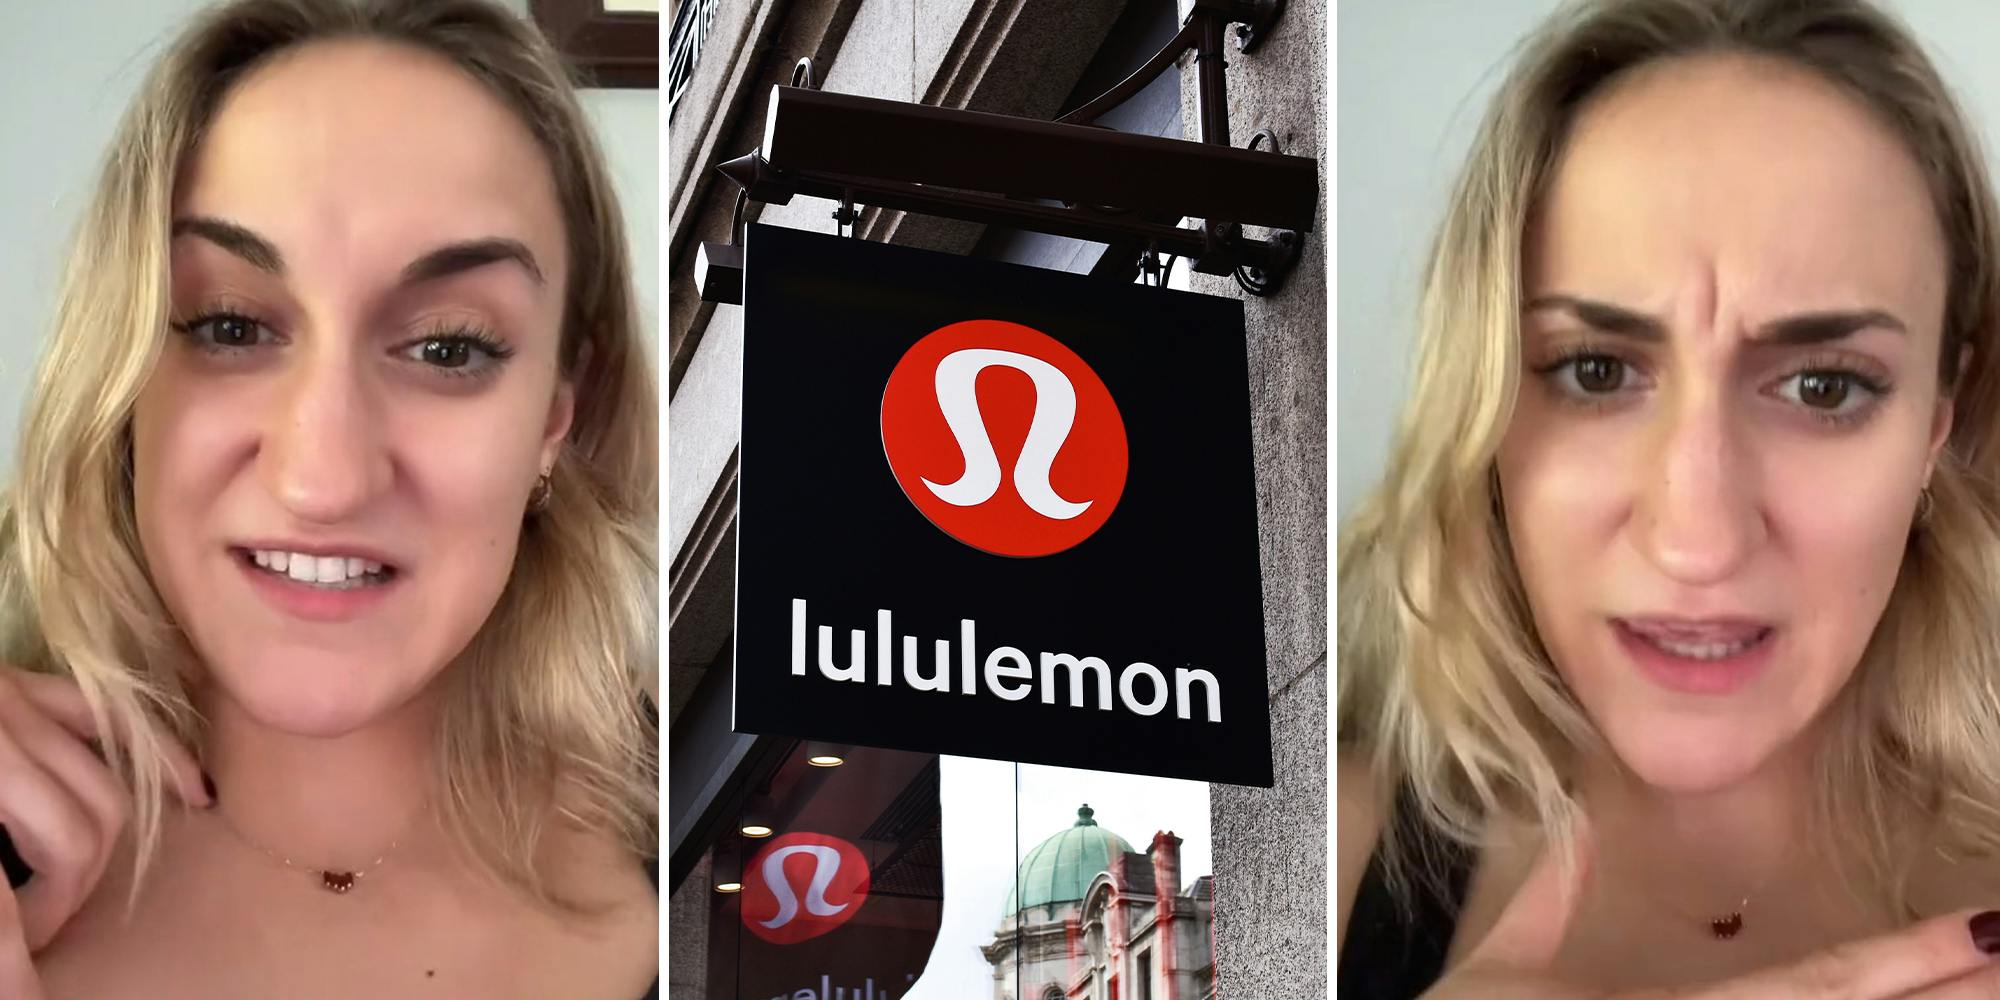 Woman says she was told not to wear Lululemon leggings during MRI